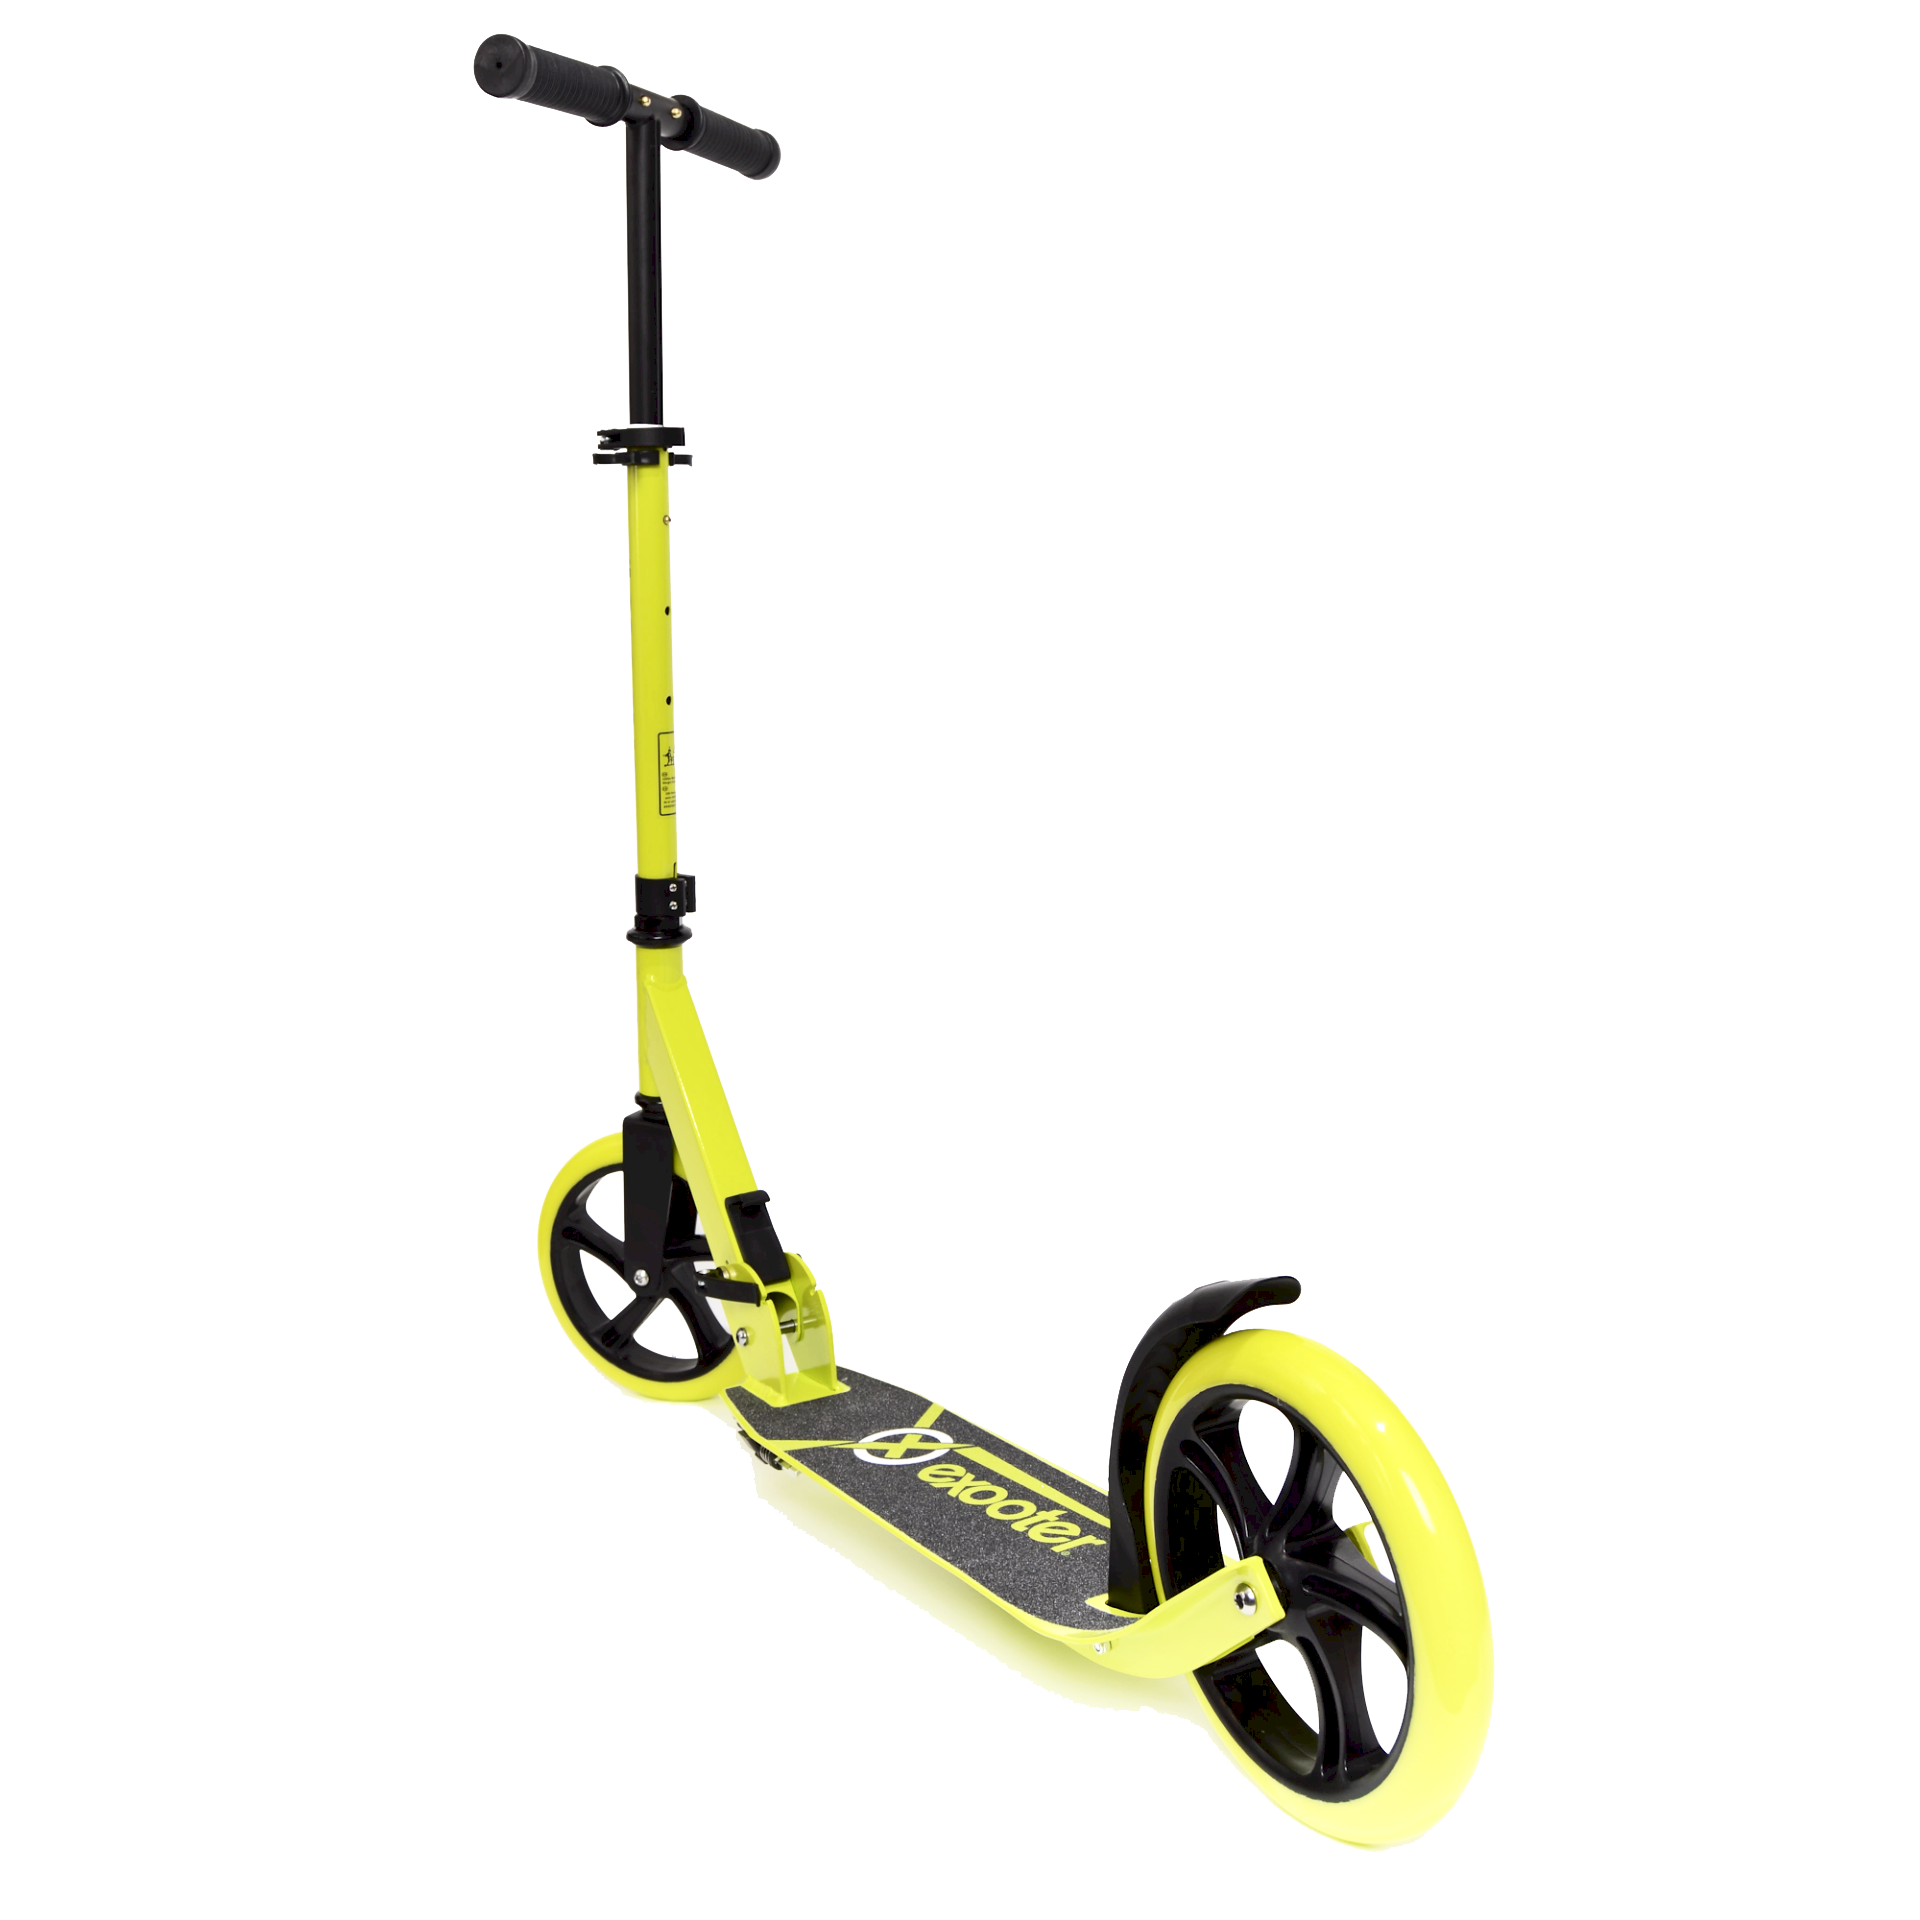 Sipa scooter Pic Pic